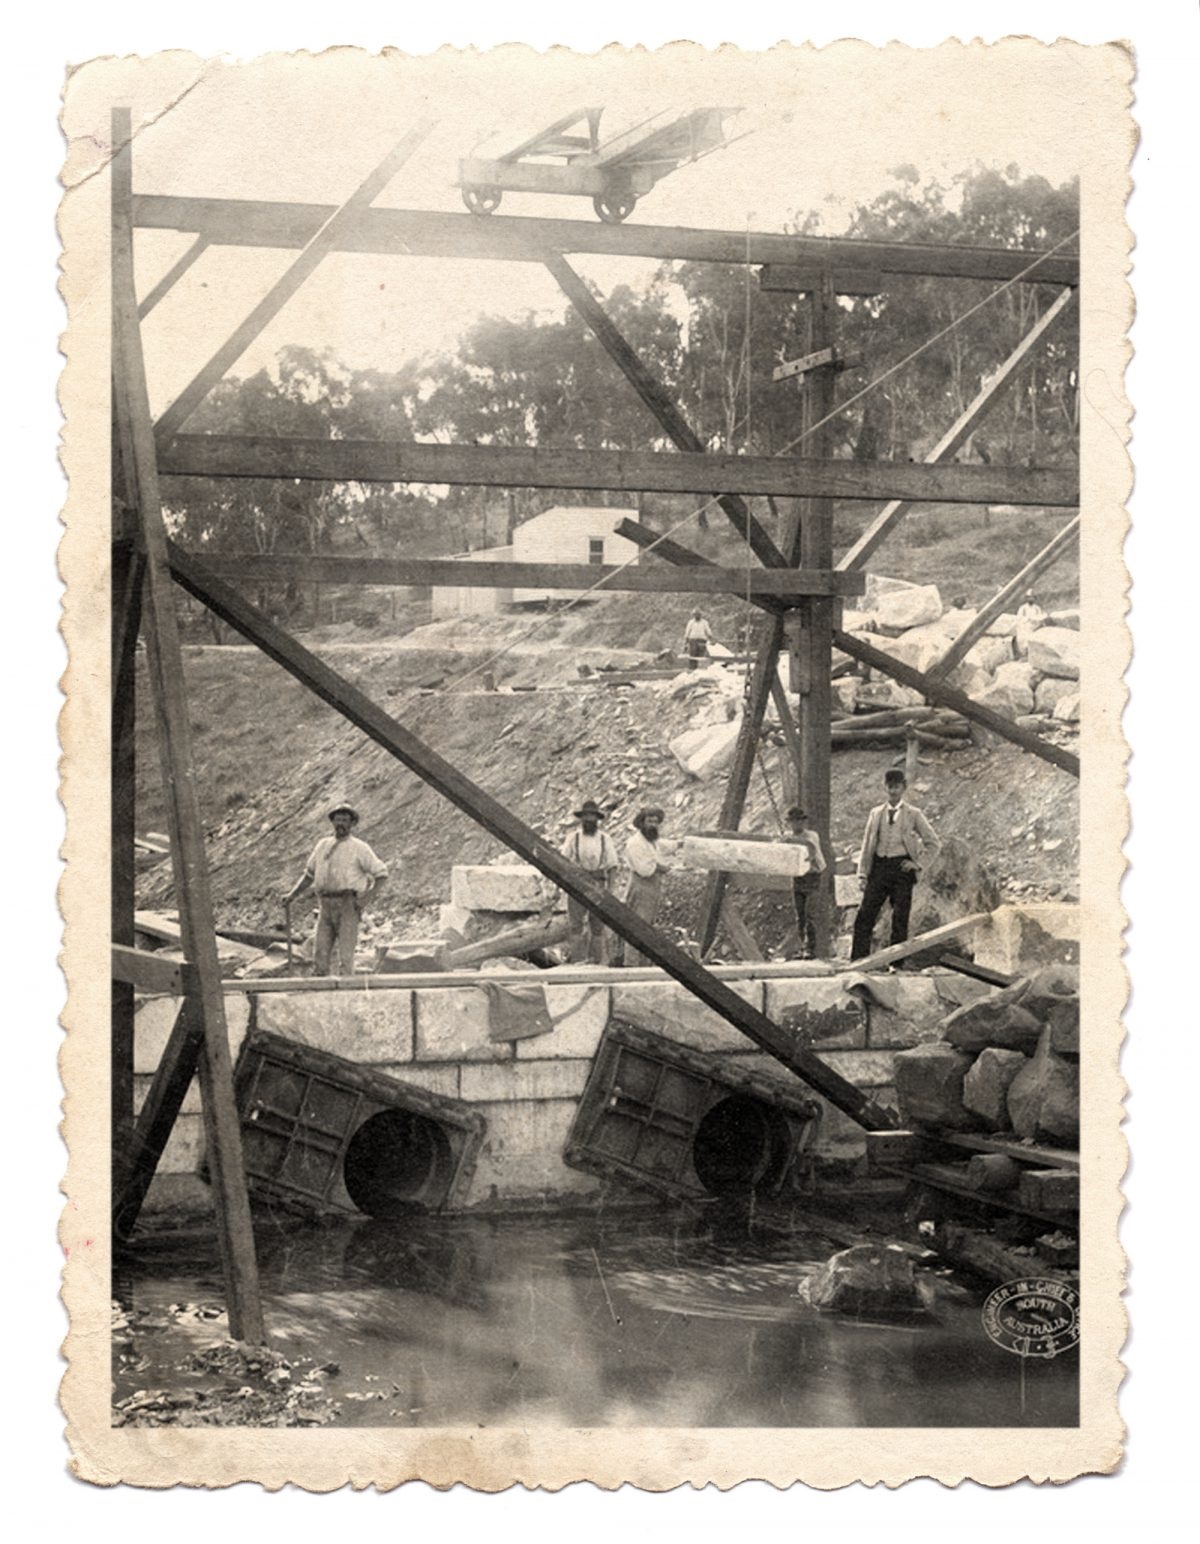 Construction of the Clarendon Weir